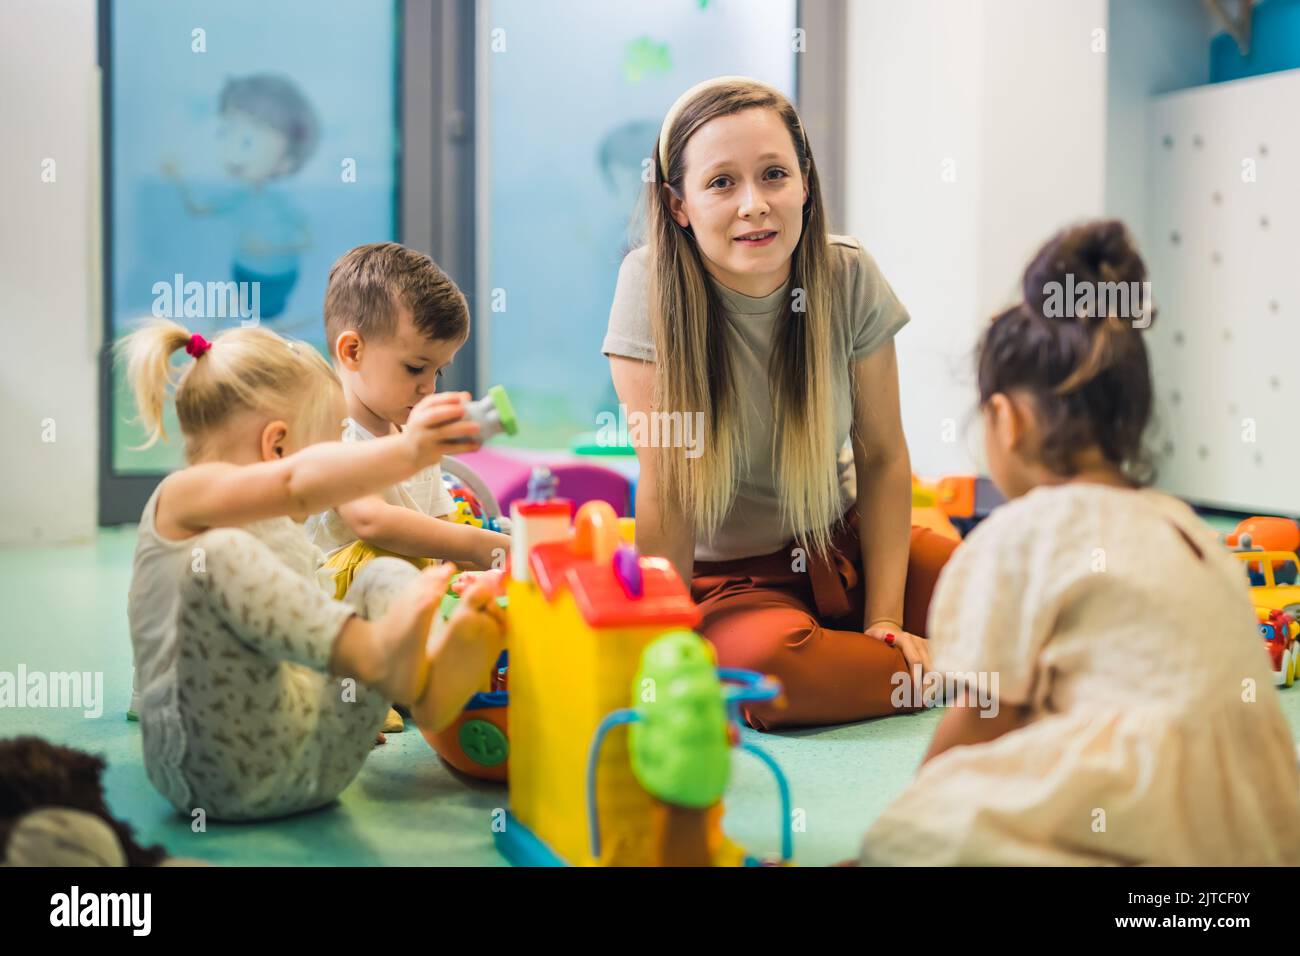 Nursery school. Toddlers and their teacher playing with colorful plastic playhouses, cars and boats. Imagination, creativity, fine motor and gross motor skills development. High quality photo Stock Photo